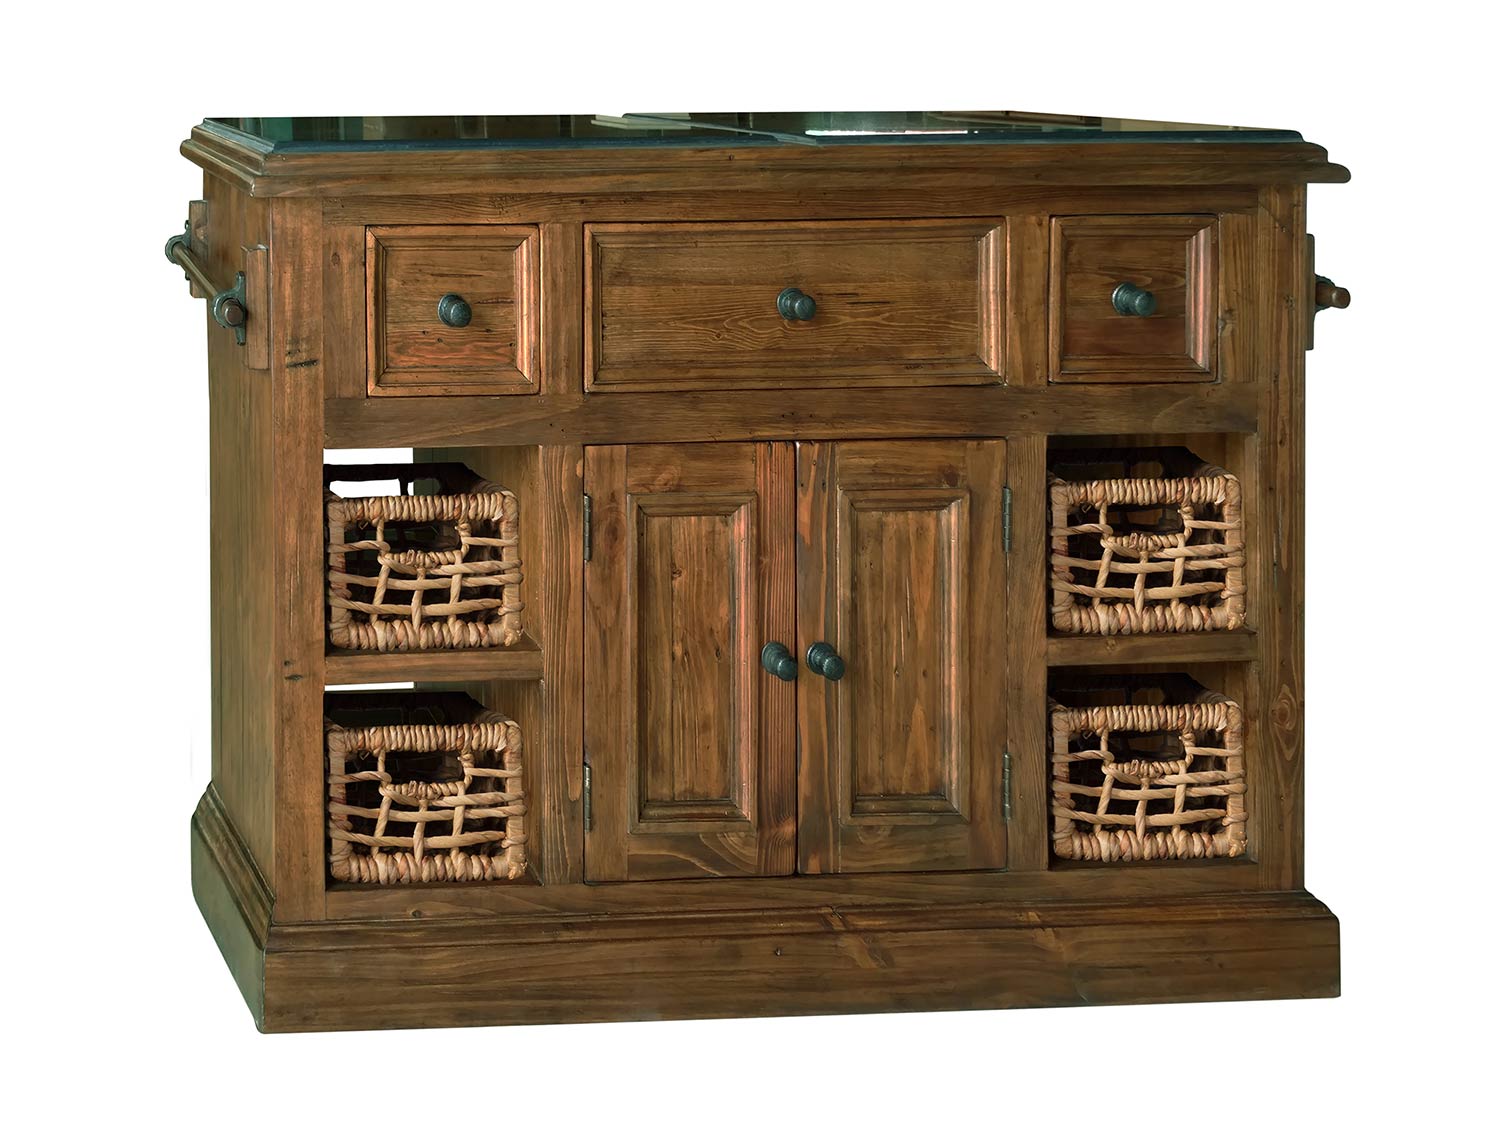 Hillsdale Tuscan Retreat Large Granite Top Kitchen Island with 2 Baskets - Oxford